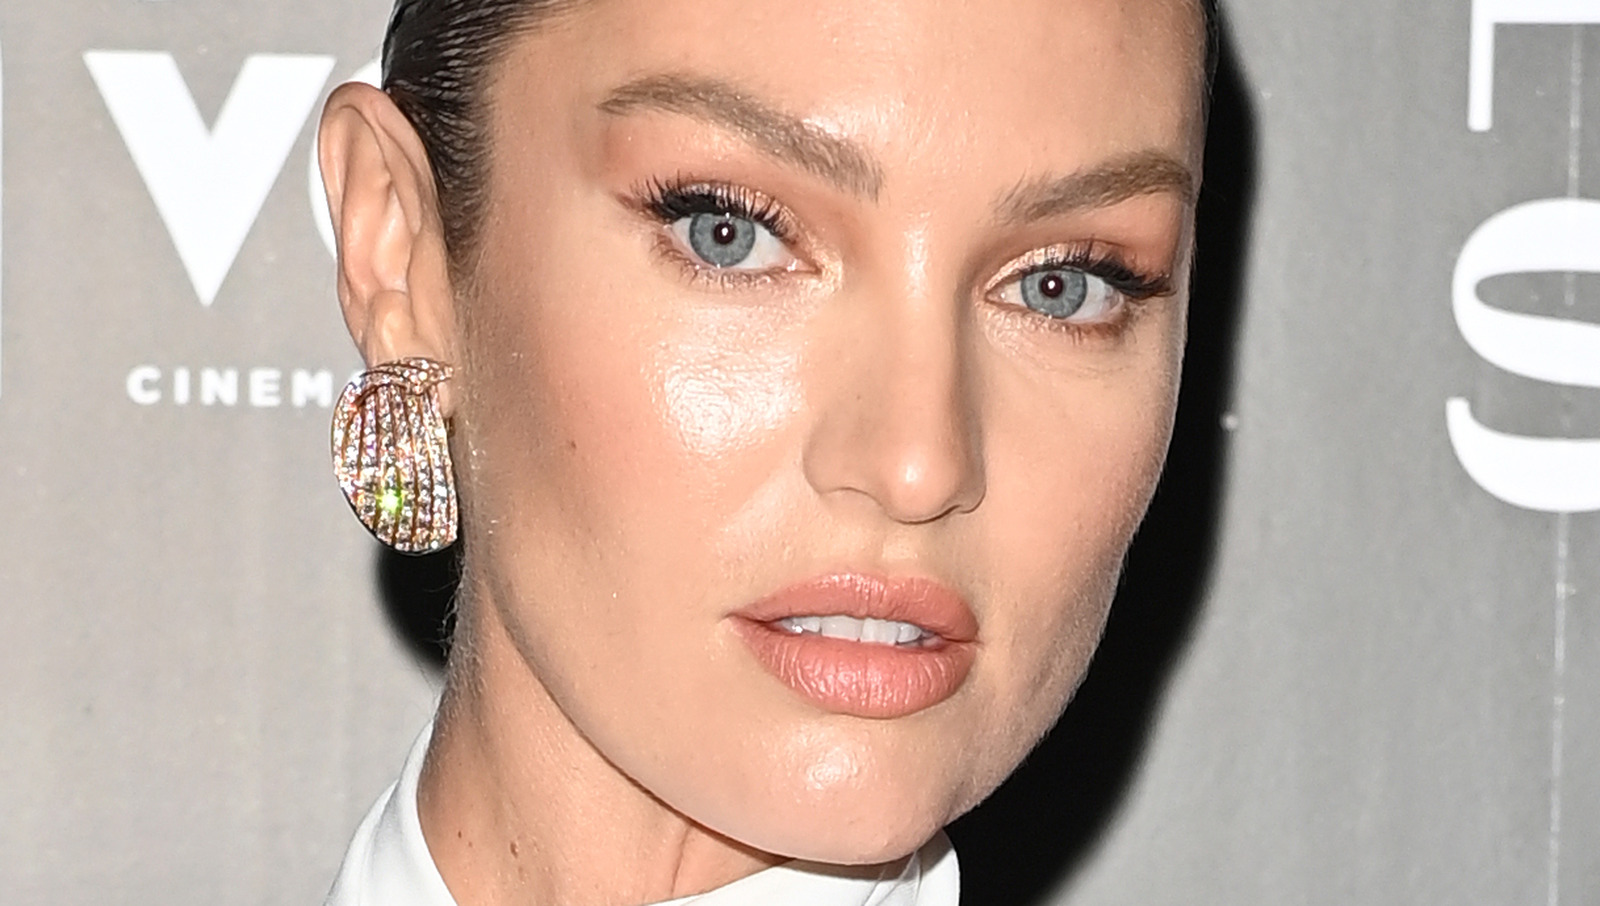 This is me 12 days after having my son' - Candice Swanepoel hits